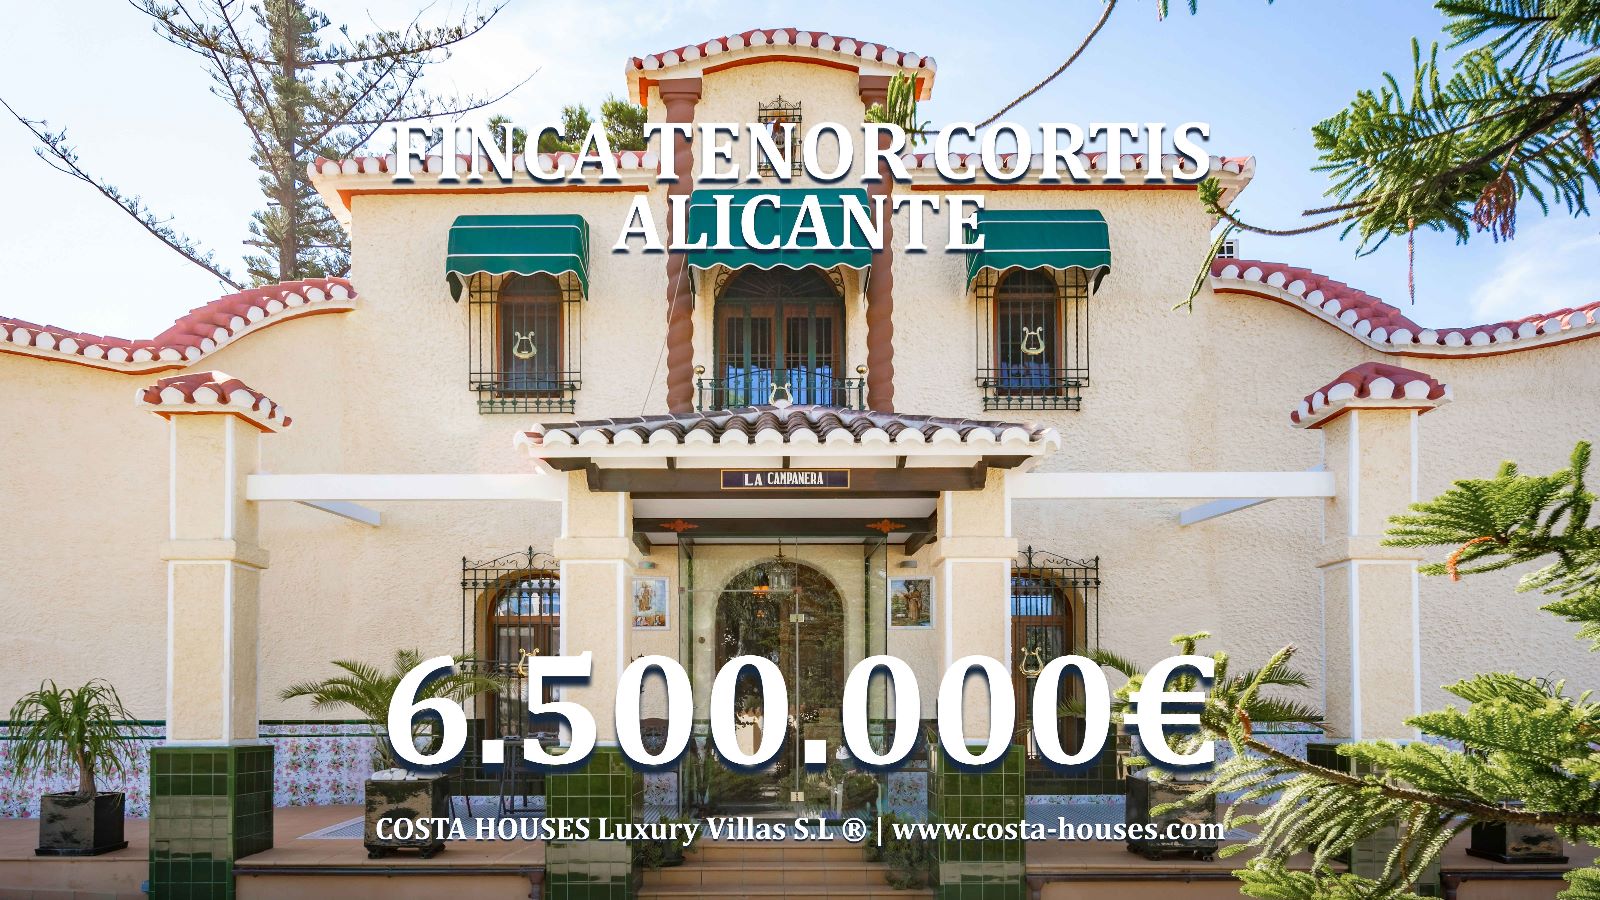 Villa TENOR CORTIS - 6.500.000€ Most Expensive Luxury House in Alicante Spain by COSTA HOUSES